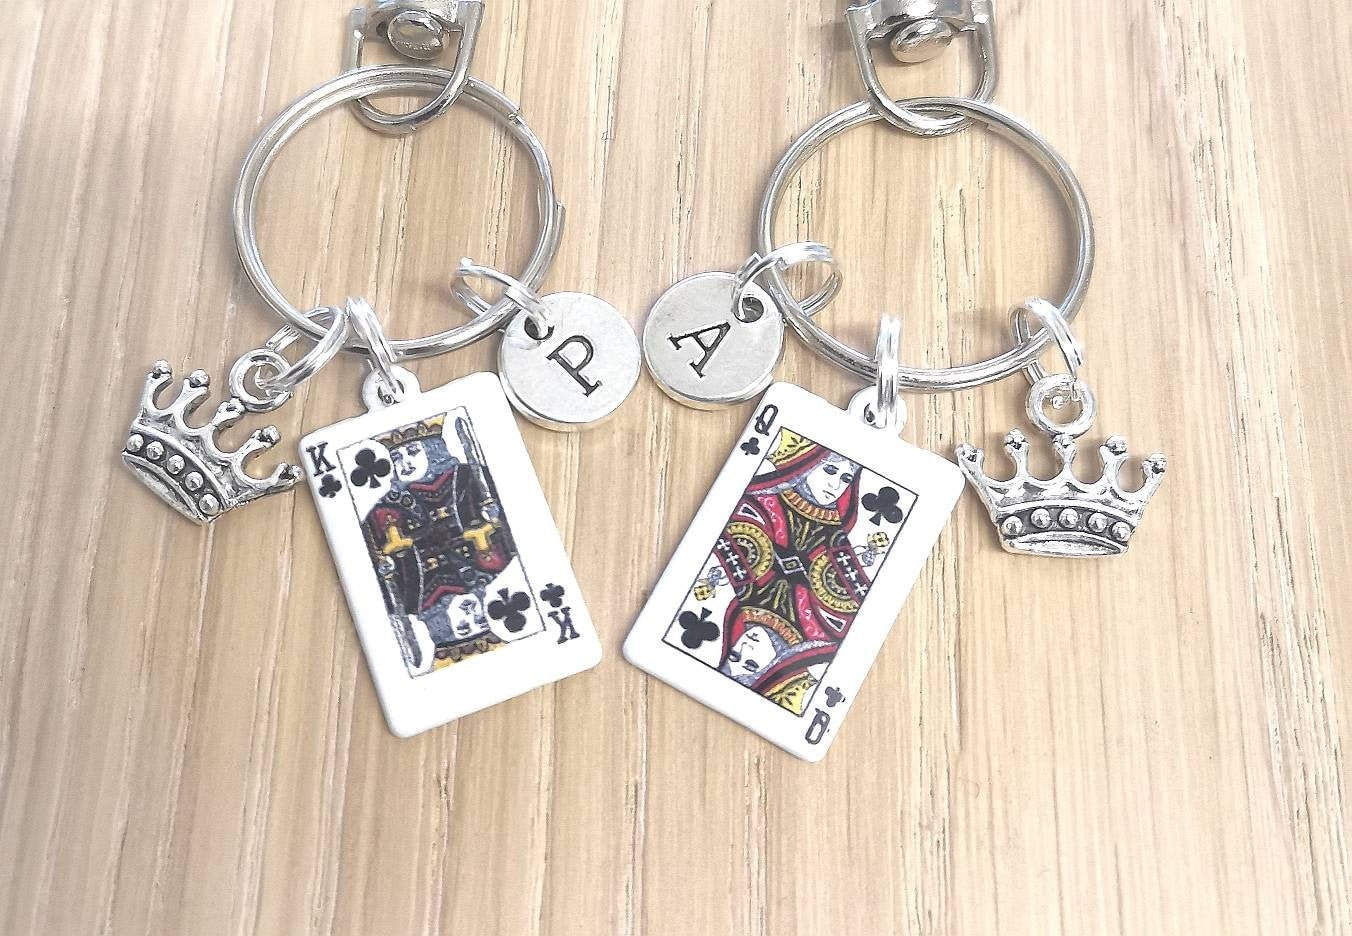 King and queen Keyring, King and queen Keychain, Couple Keyring, Couple Keychain, Boyfriend Girlfriend, Anniversary, Personalised Boyfriend